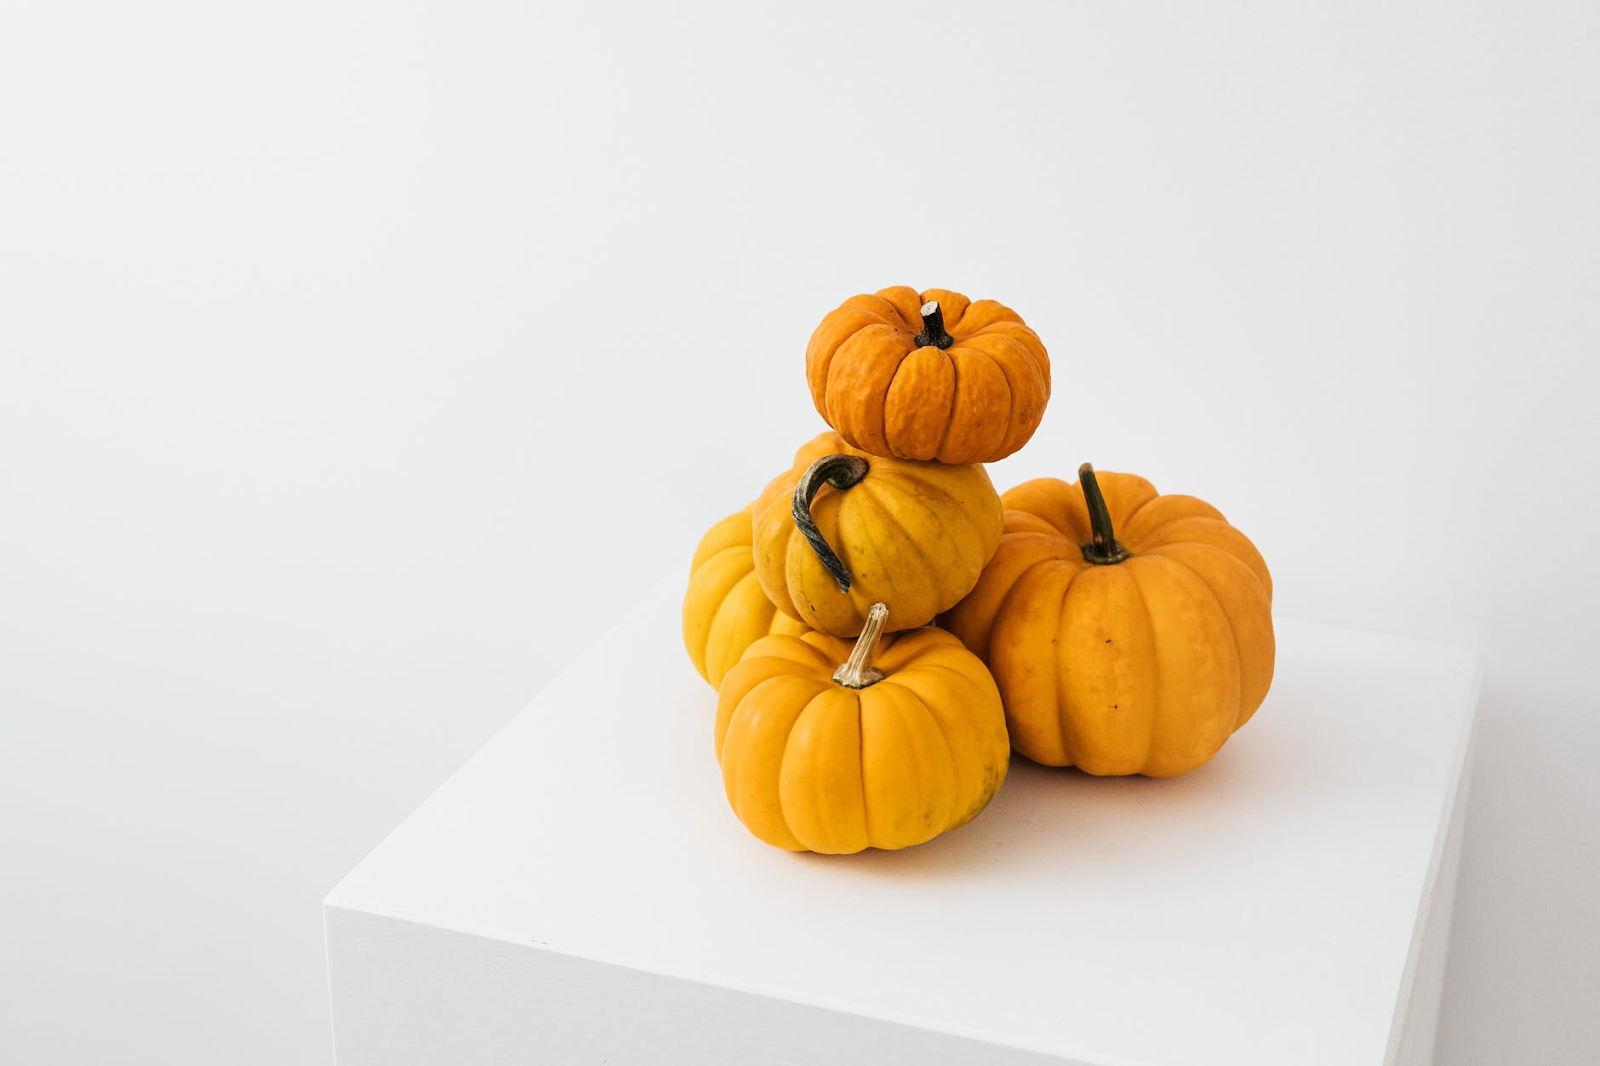 A group of pumpkins

Description automatically generated with low confidence